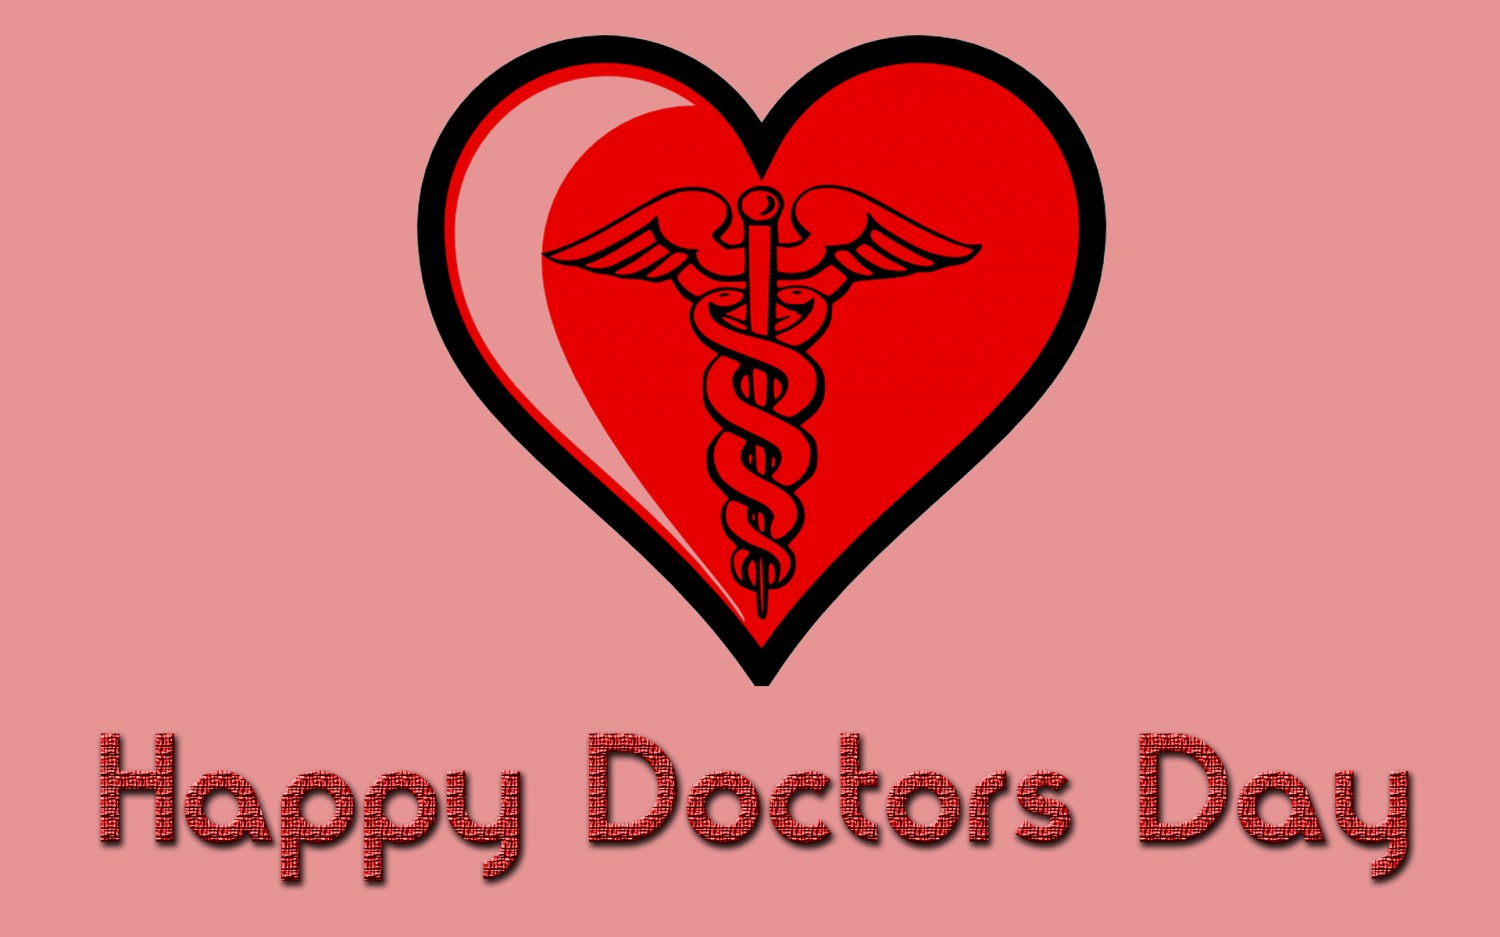 Doctors Day 2018 Wallpaper free download